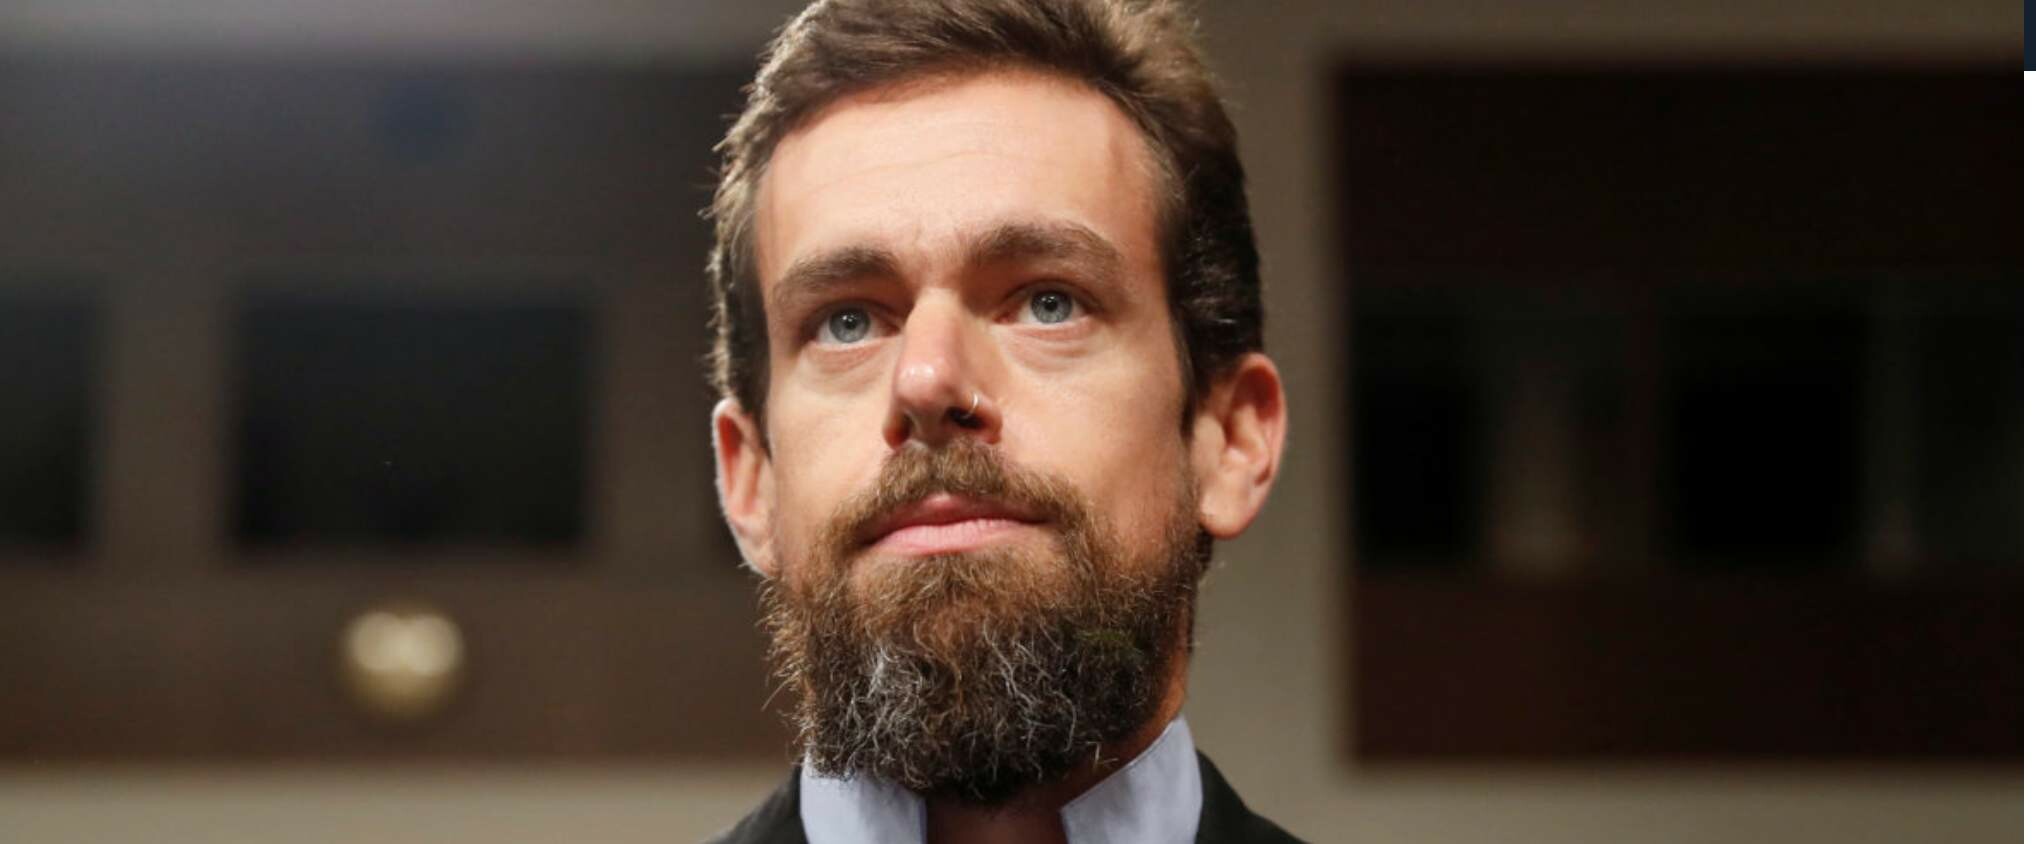 CRYPTONEWSBYTES.COM Jack-Dorsey-Twitter-TBD Jack Dorsey's TBD Launches Bitcoin Lightning Node and Decentralized Financial Services  